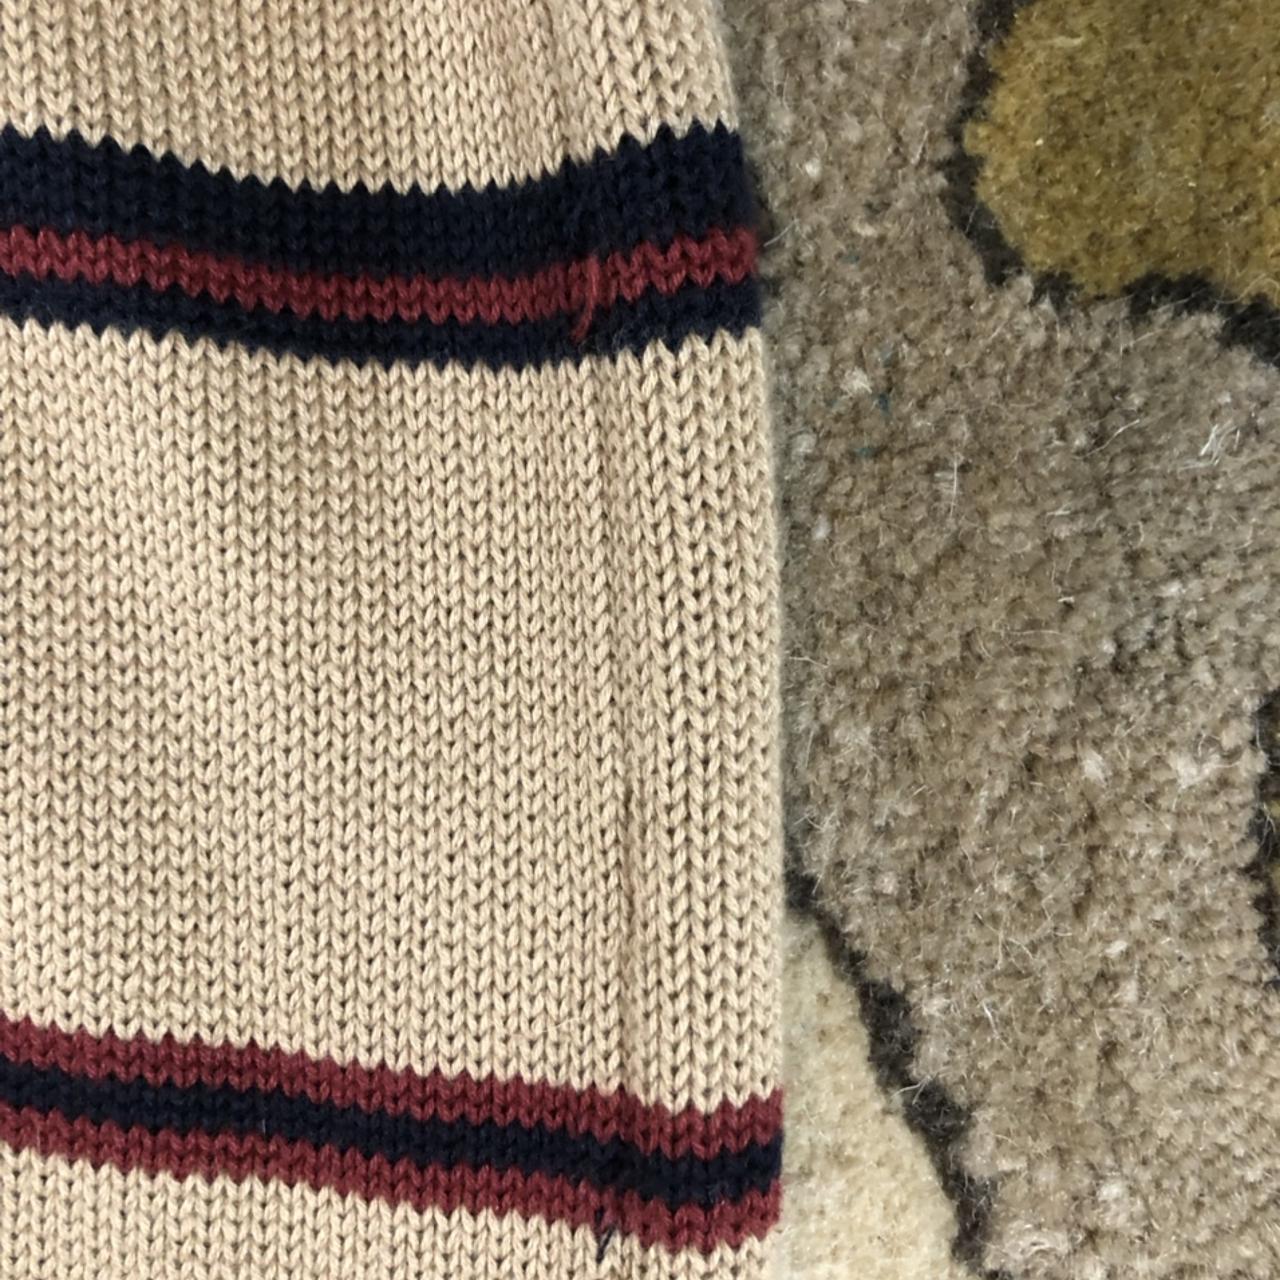 17London Men's Cream and Red Jumper (4)